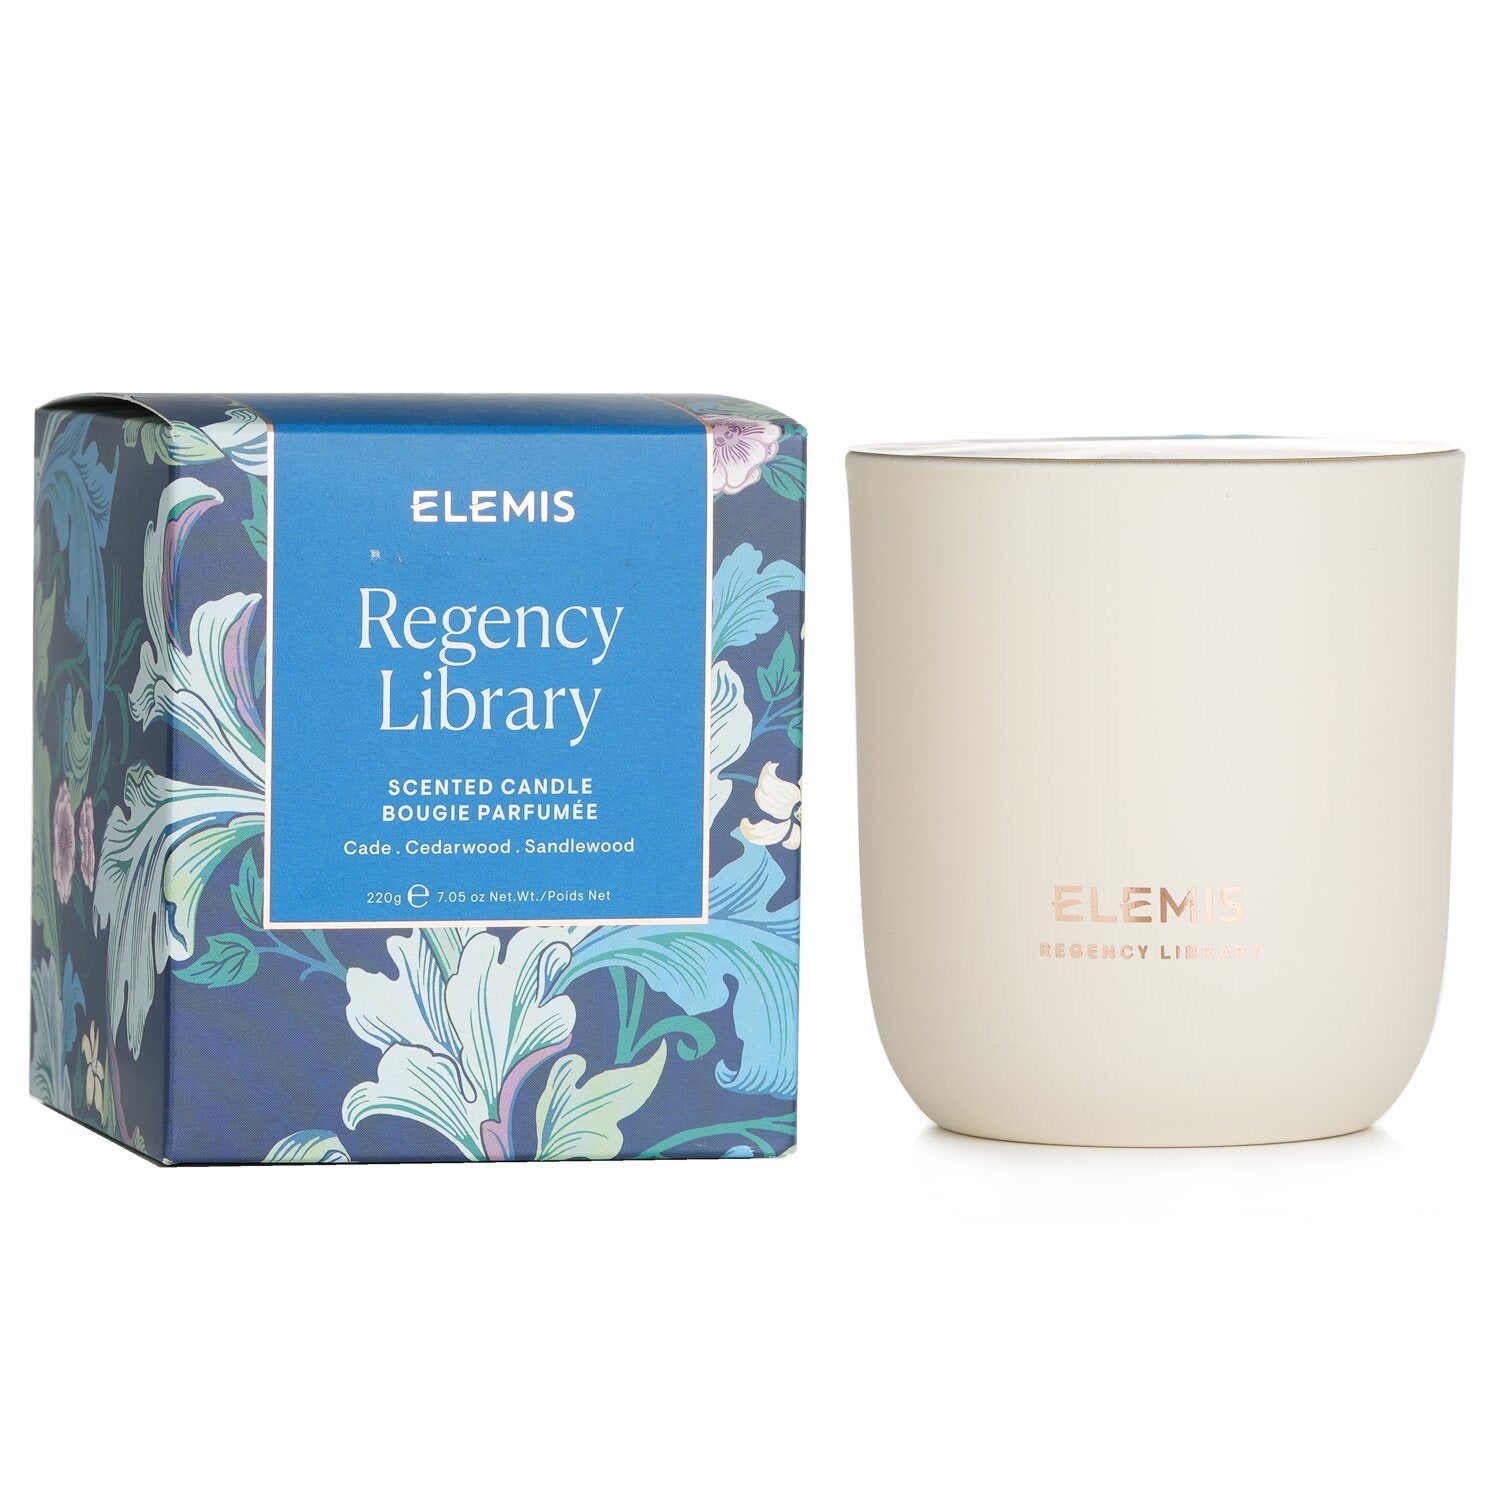 A white ELEMIS - Scented Candle - Regency Library 888924 220g/7.05oz with the words elemis on it, featuring a pleasant fragrance.